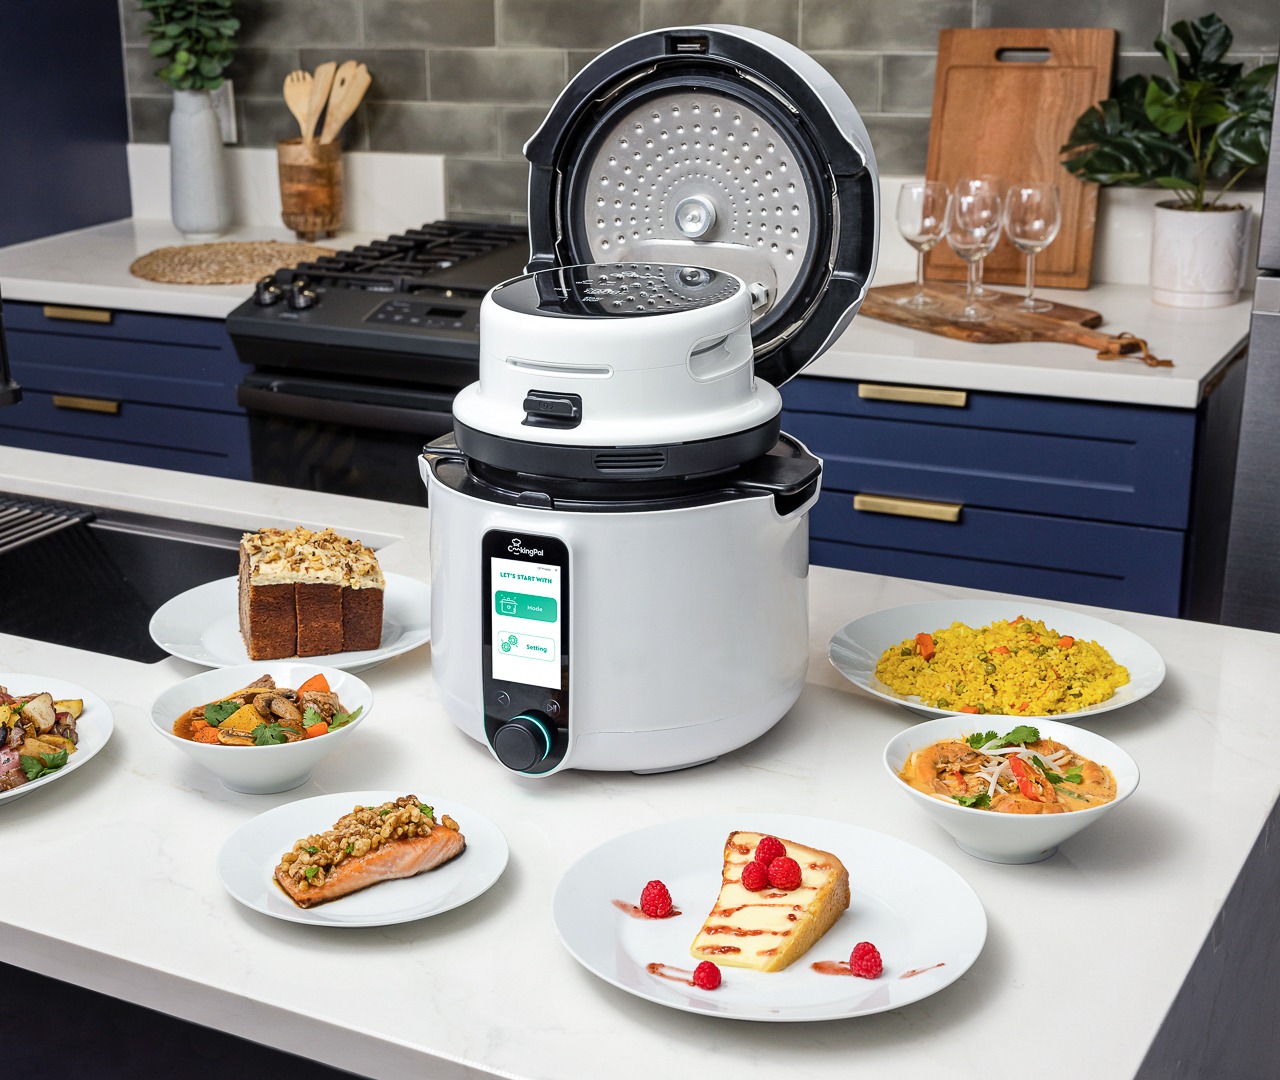 https://www.yankodesign.com/images/design_news/2023/02/this-modular-kitchen-appliance-does-the-job-of-a-weighing-scale-pressure-cooker-saucepan-and-air-fryer/this_smart_pressure_cooker_and_air_fryer_is_a_powerhouse_05.jpg